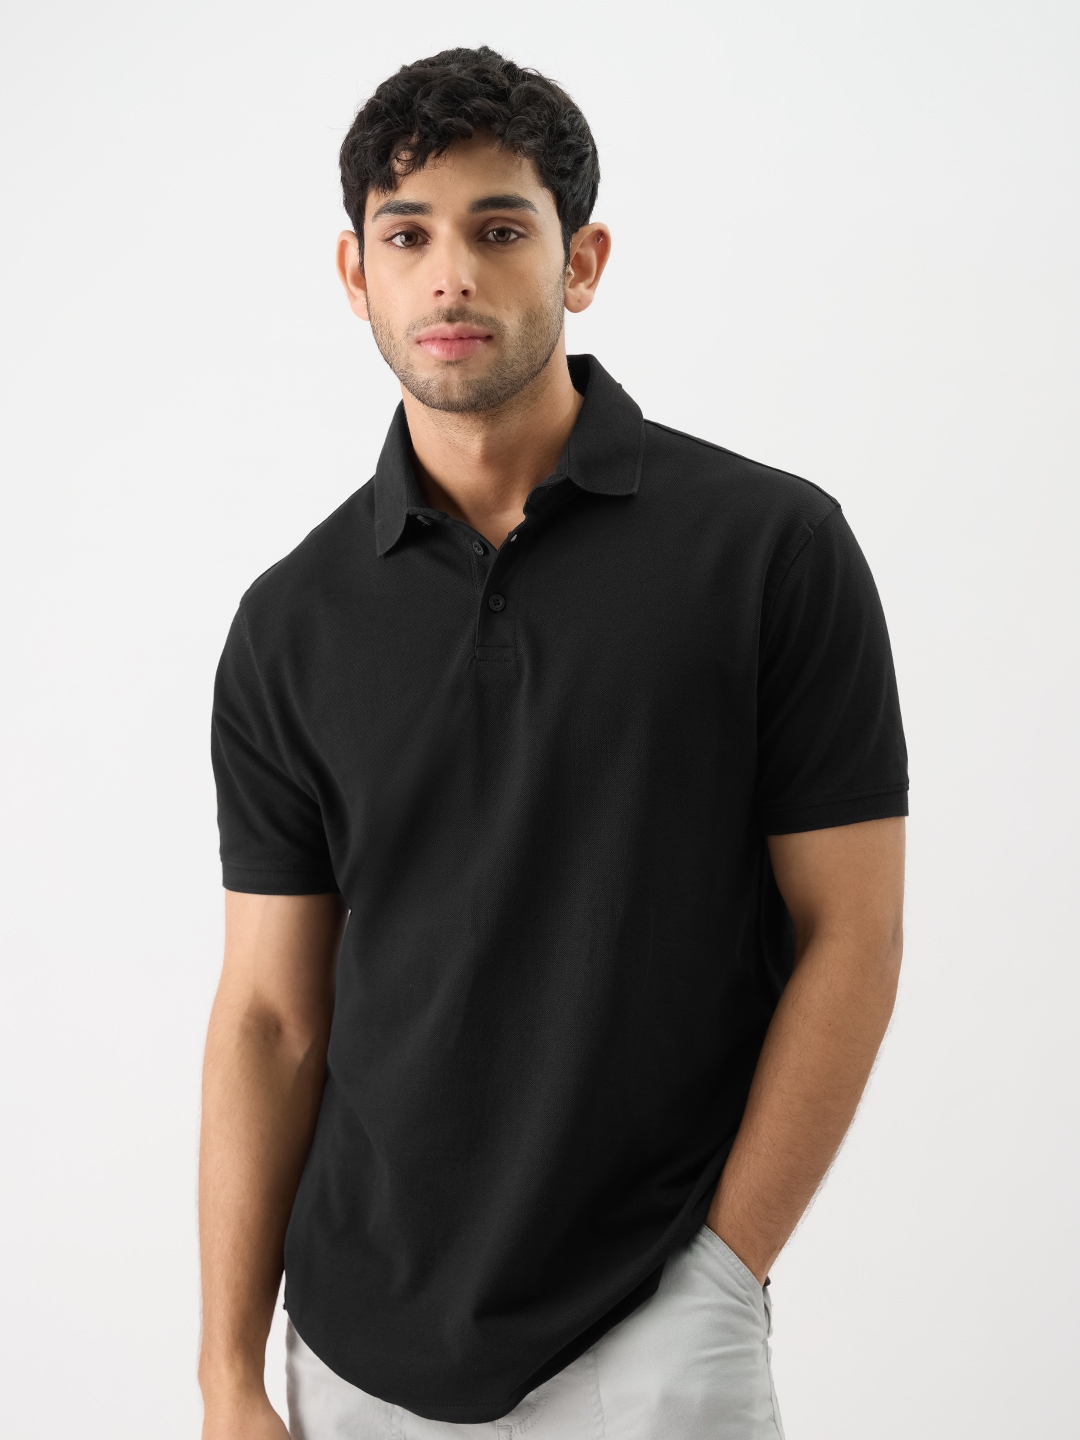 The Souled Store | Men's Solids: Black Polo T-Shirt